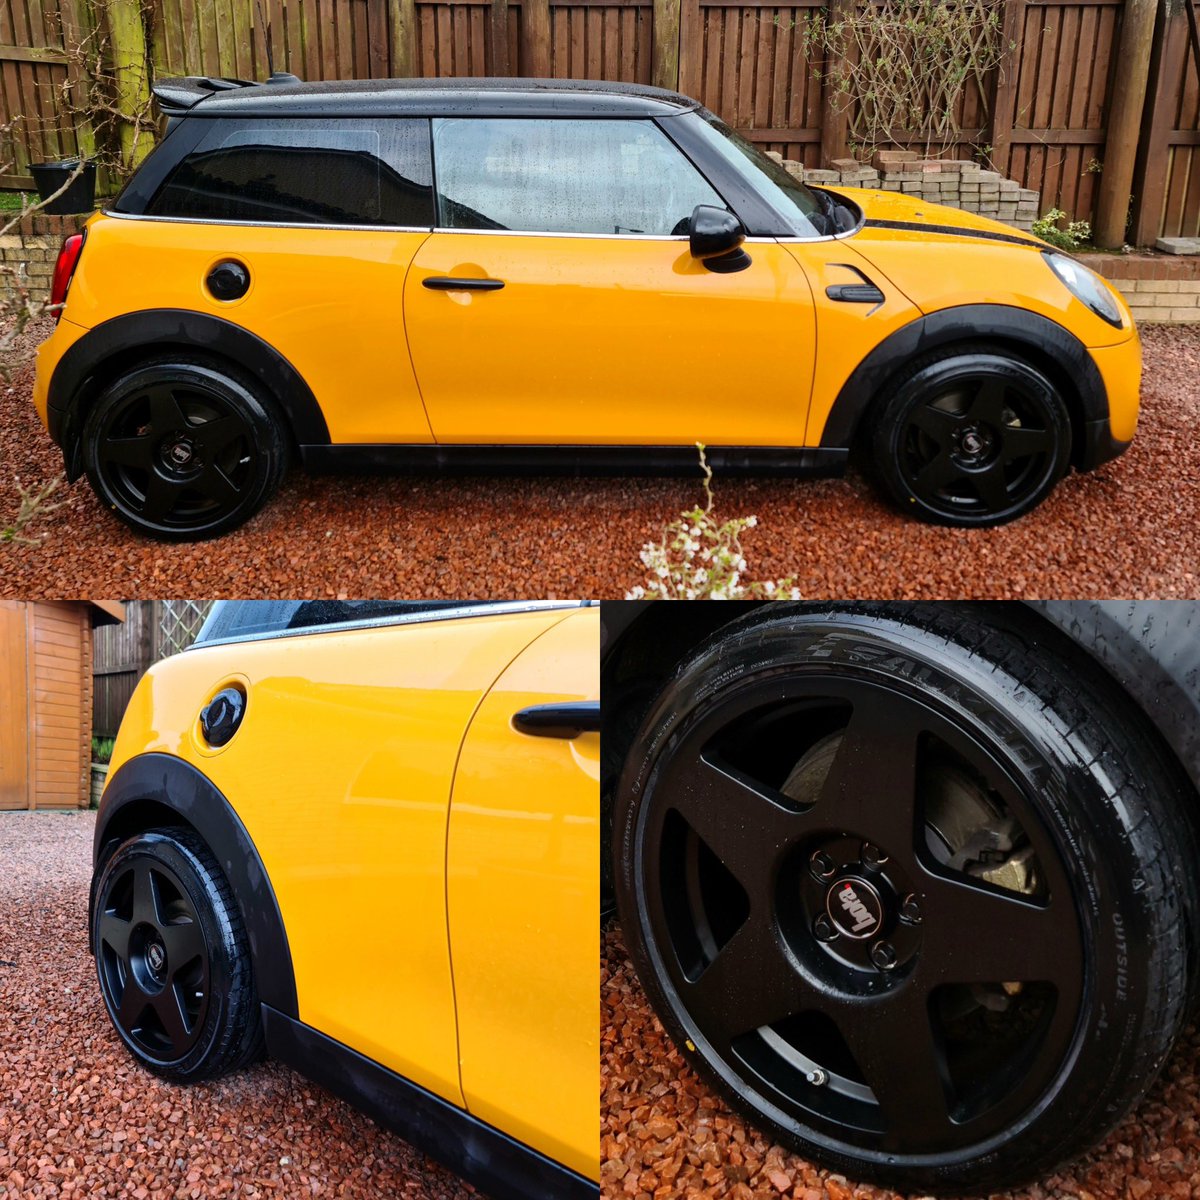 Pictures sent to us by a customer we supplied recently with a new set of 17” Bola B10 wheels and Falken tyres 😍 #motorsoundcomplex #minicooper #bolawheels #falkentyres #Glasgow #scotland